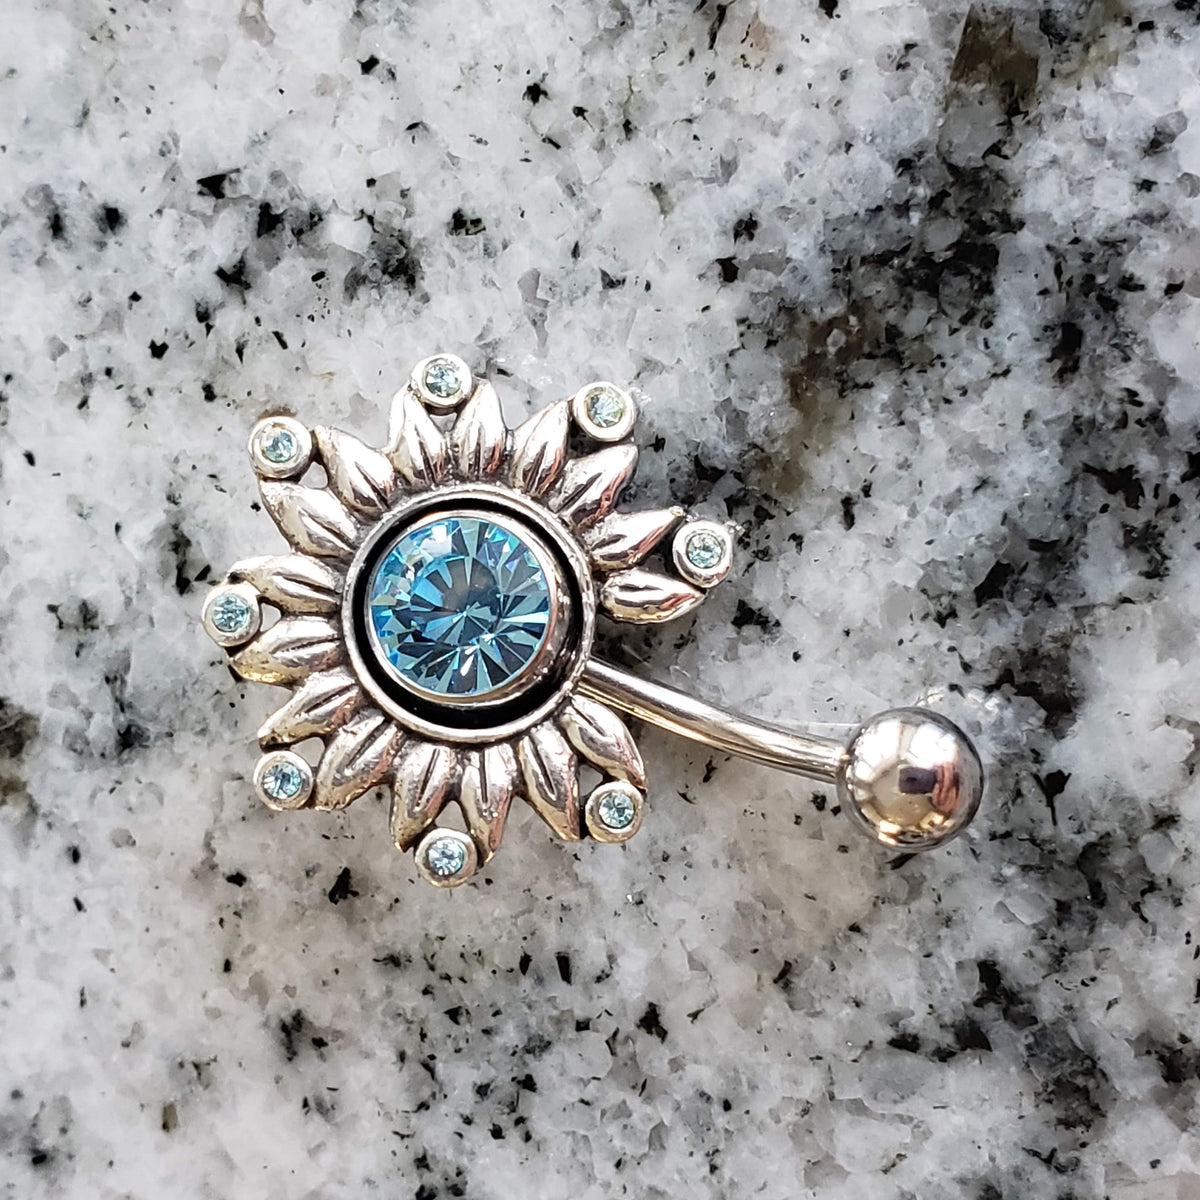 Flower Belly Ring with Navel Shield | Surgical Steel and 925 Silver | Aquamarine Crystal